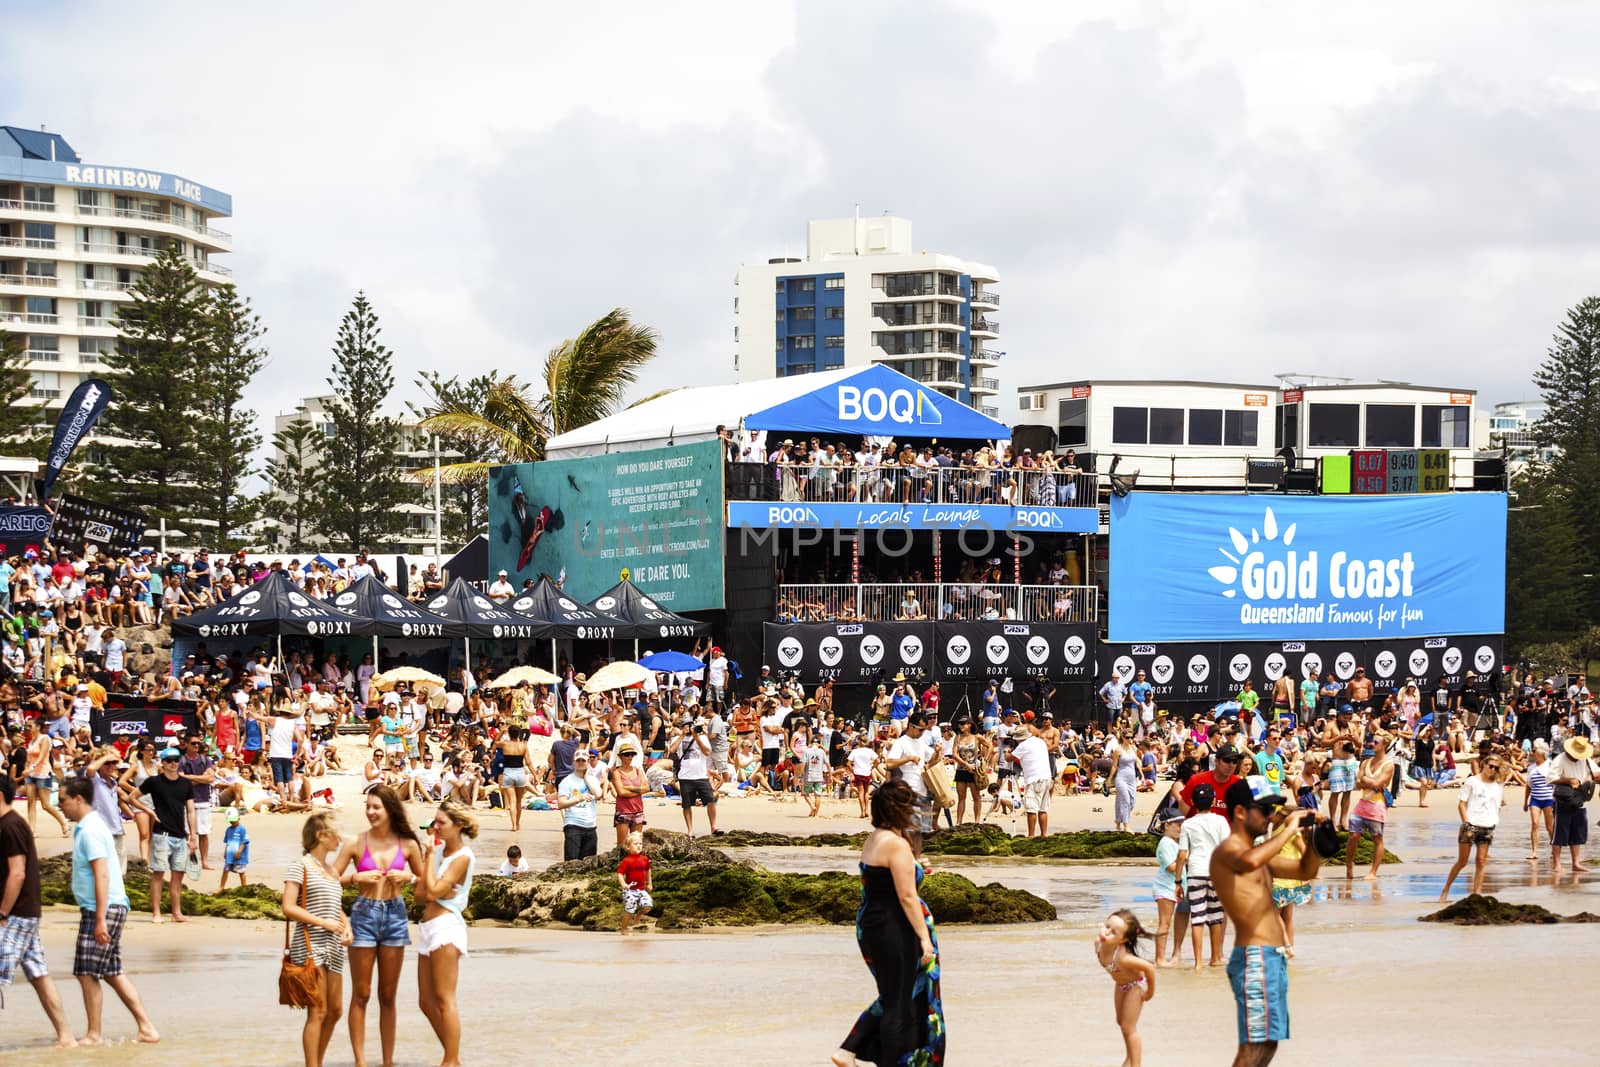 Spectators viewing the Quiksilver & Roxy Pro World Title Event by Imagecom